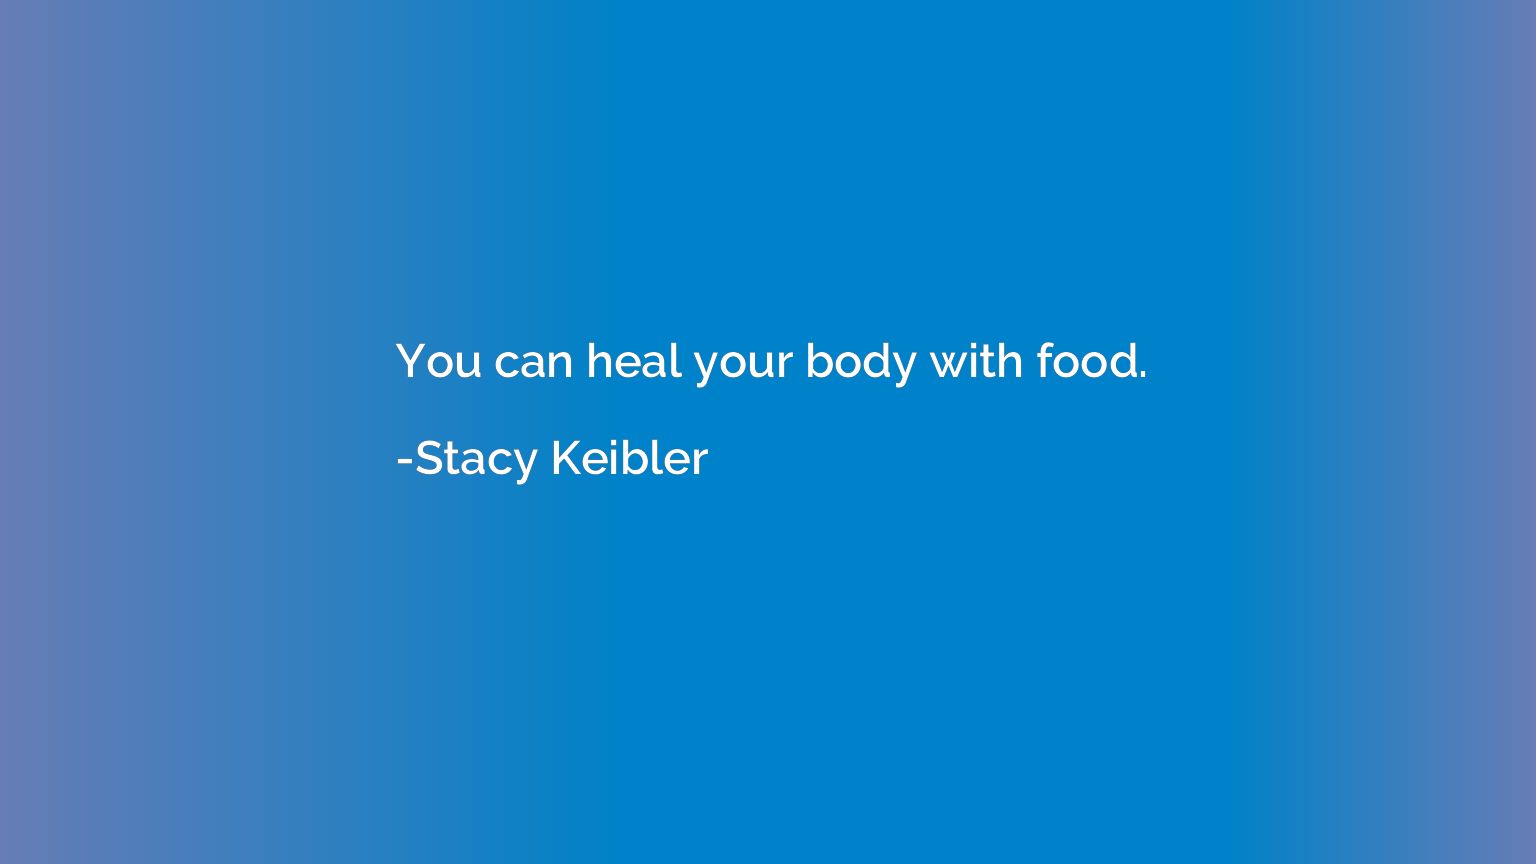 You can heal your body with food.